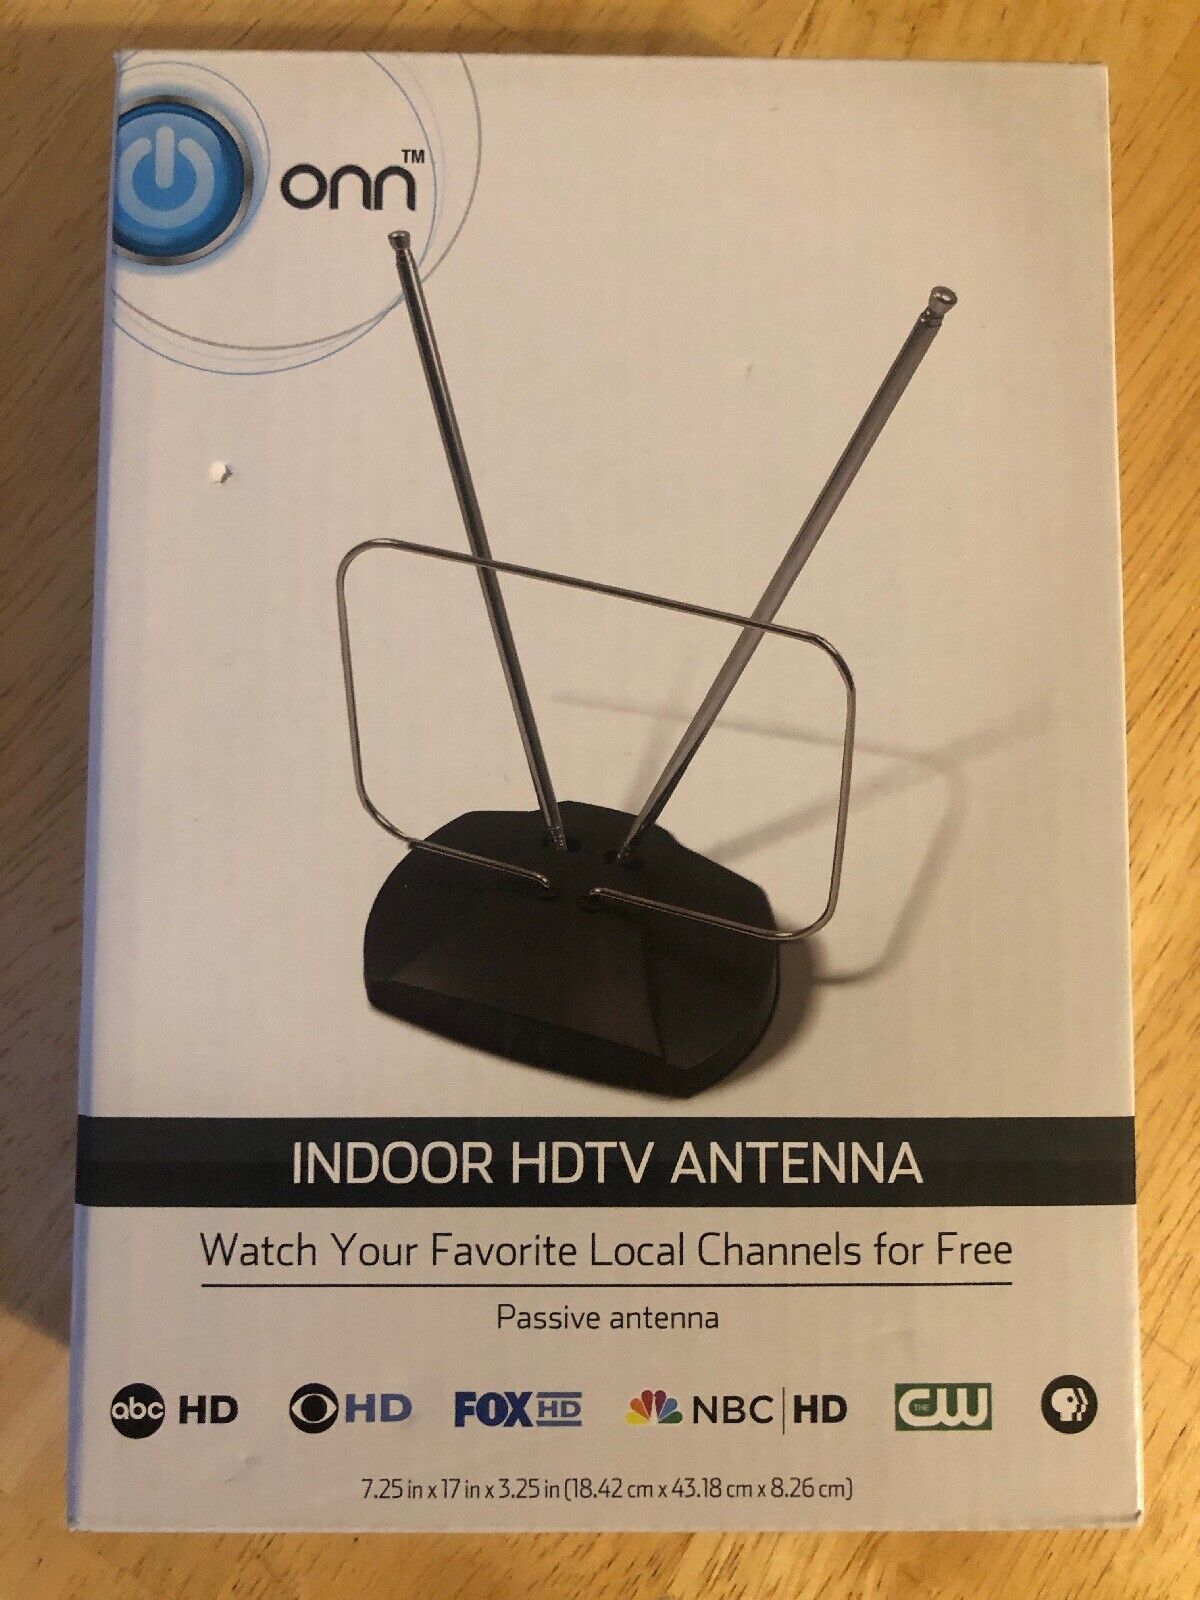 Onn Indoor Easy-Adjust HDTV Antenna, Brand New,  Free Shipping . Available Now for 12.99